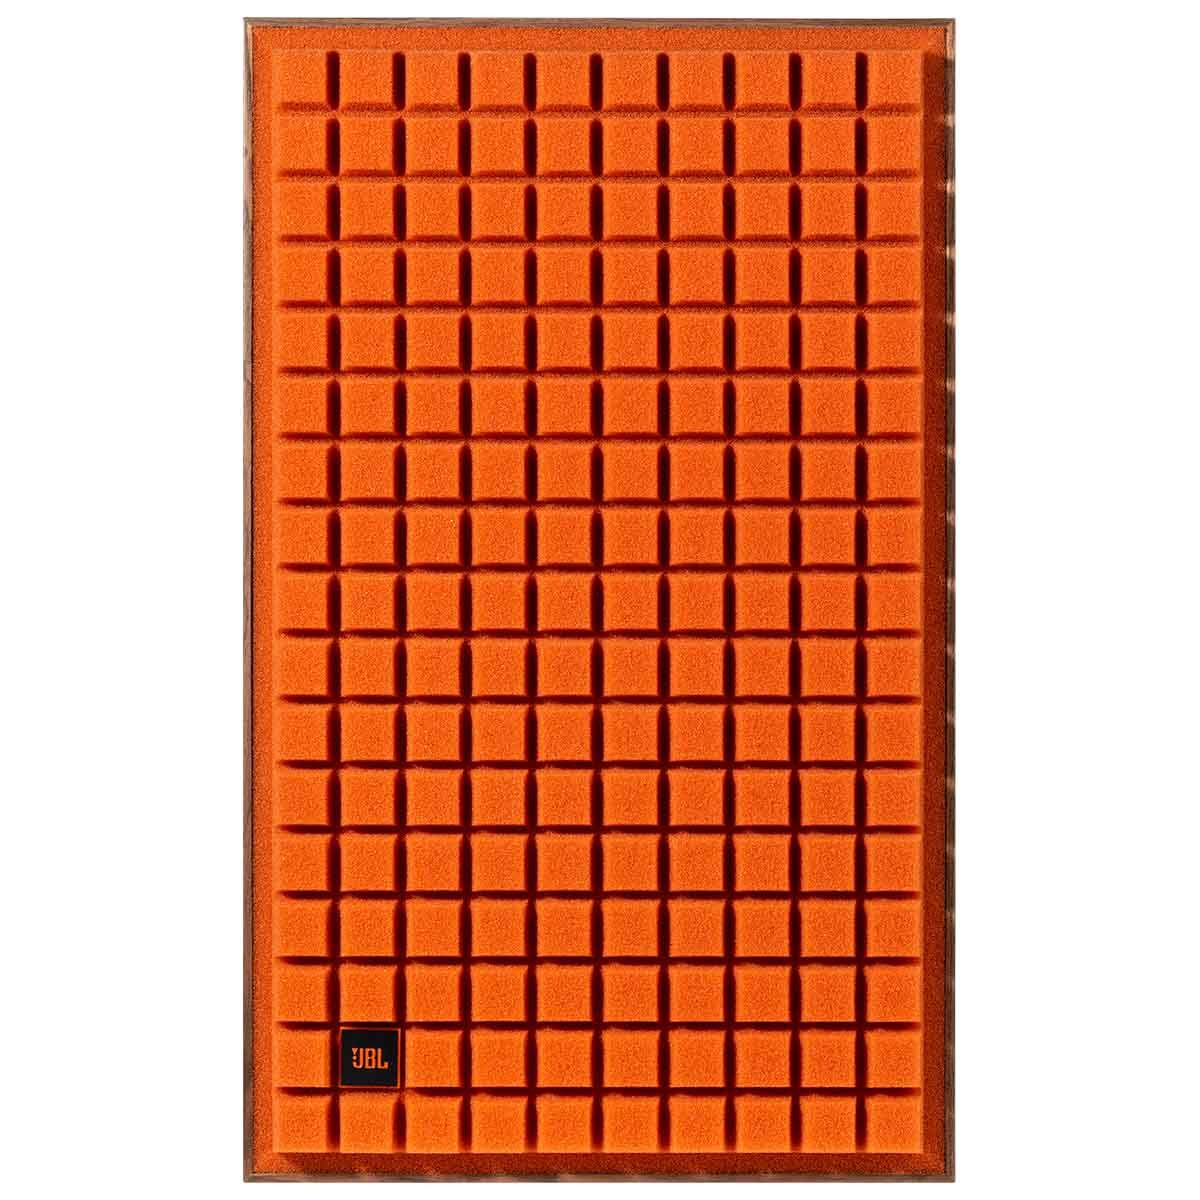 JBL L100 Classic MKII Loudspeaker Orange front view with grille